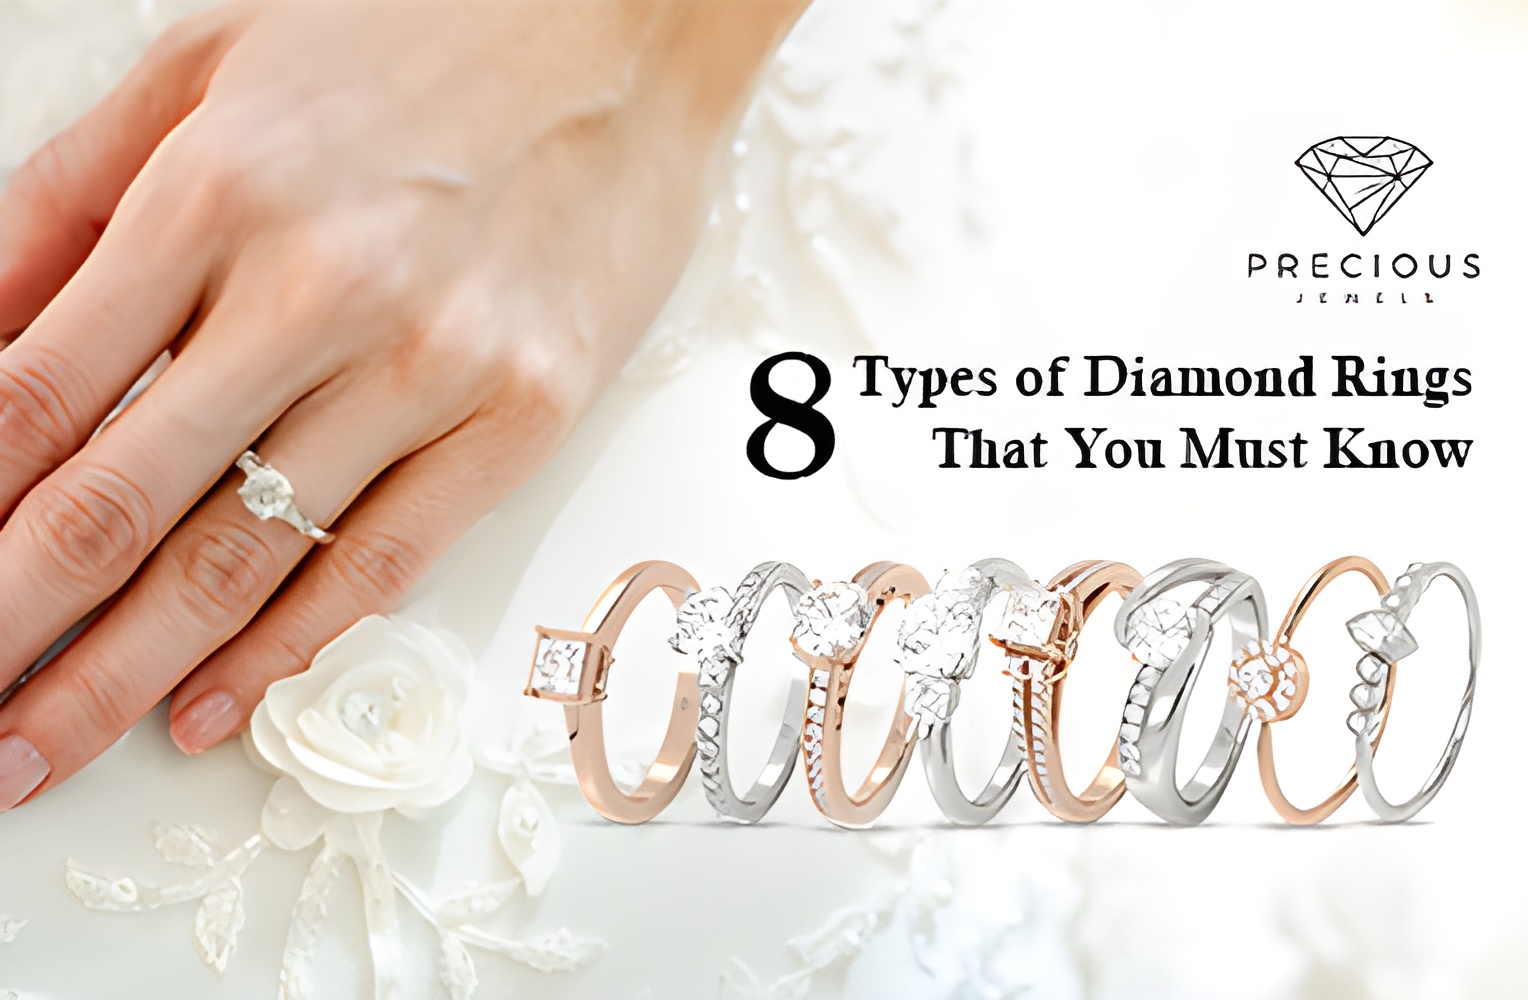 Diamond Cuts | A Guide to Different Types of Diamond Cuts